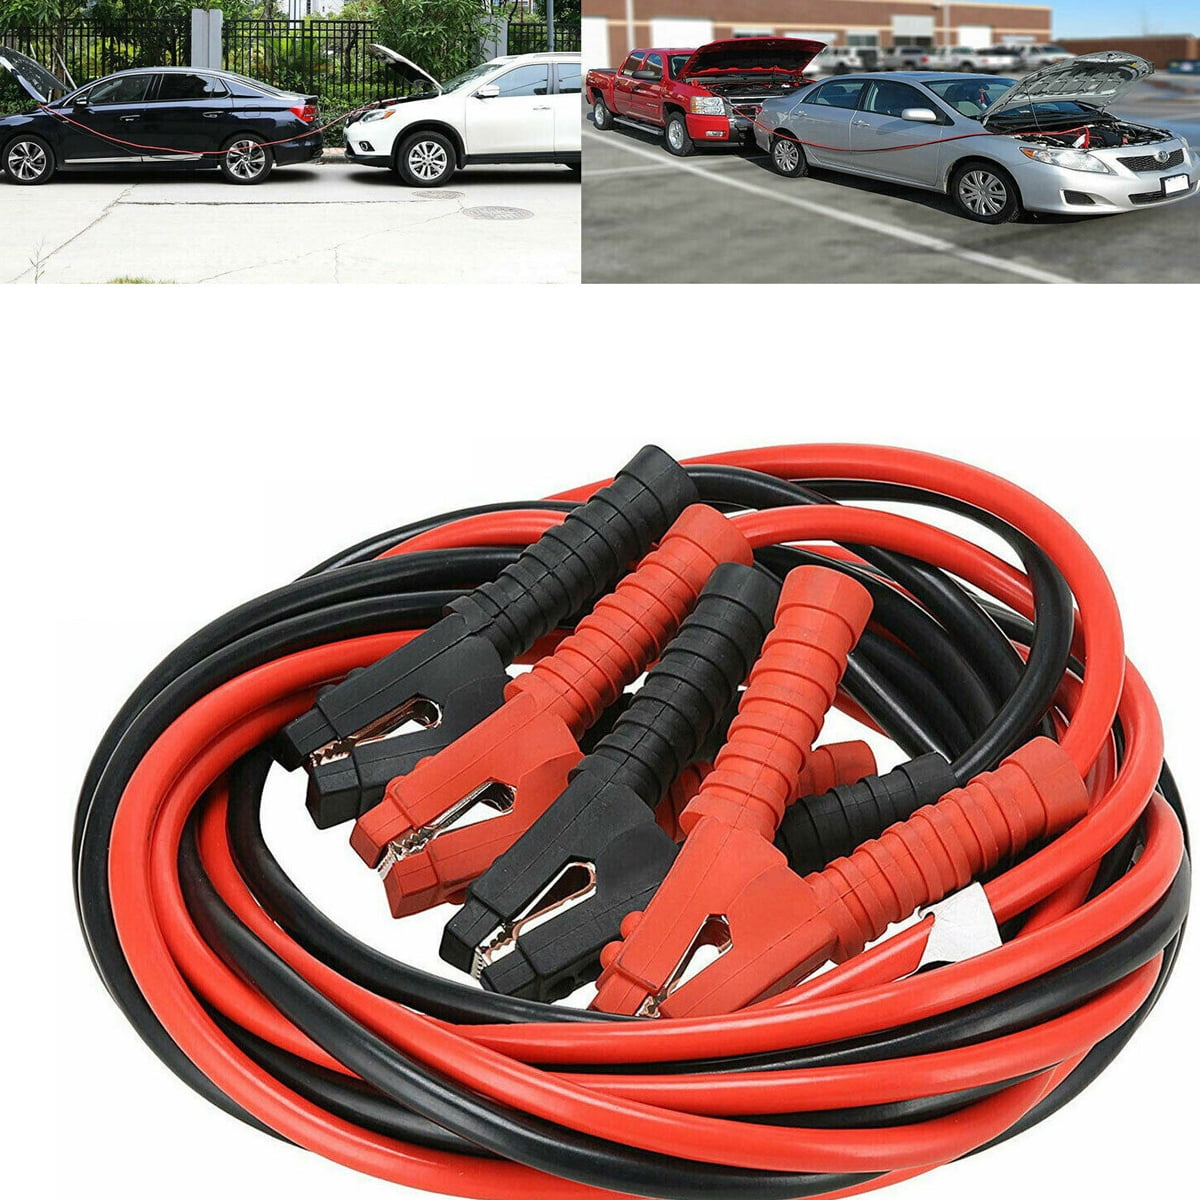 3000Amp 0 Gauge Booster Cables Jumper Leads Heavy Duty Car Van Clamps Start 20ft, Size: 600